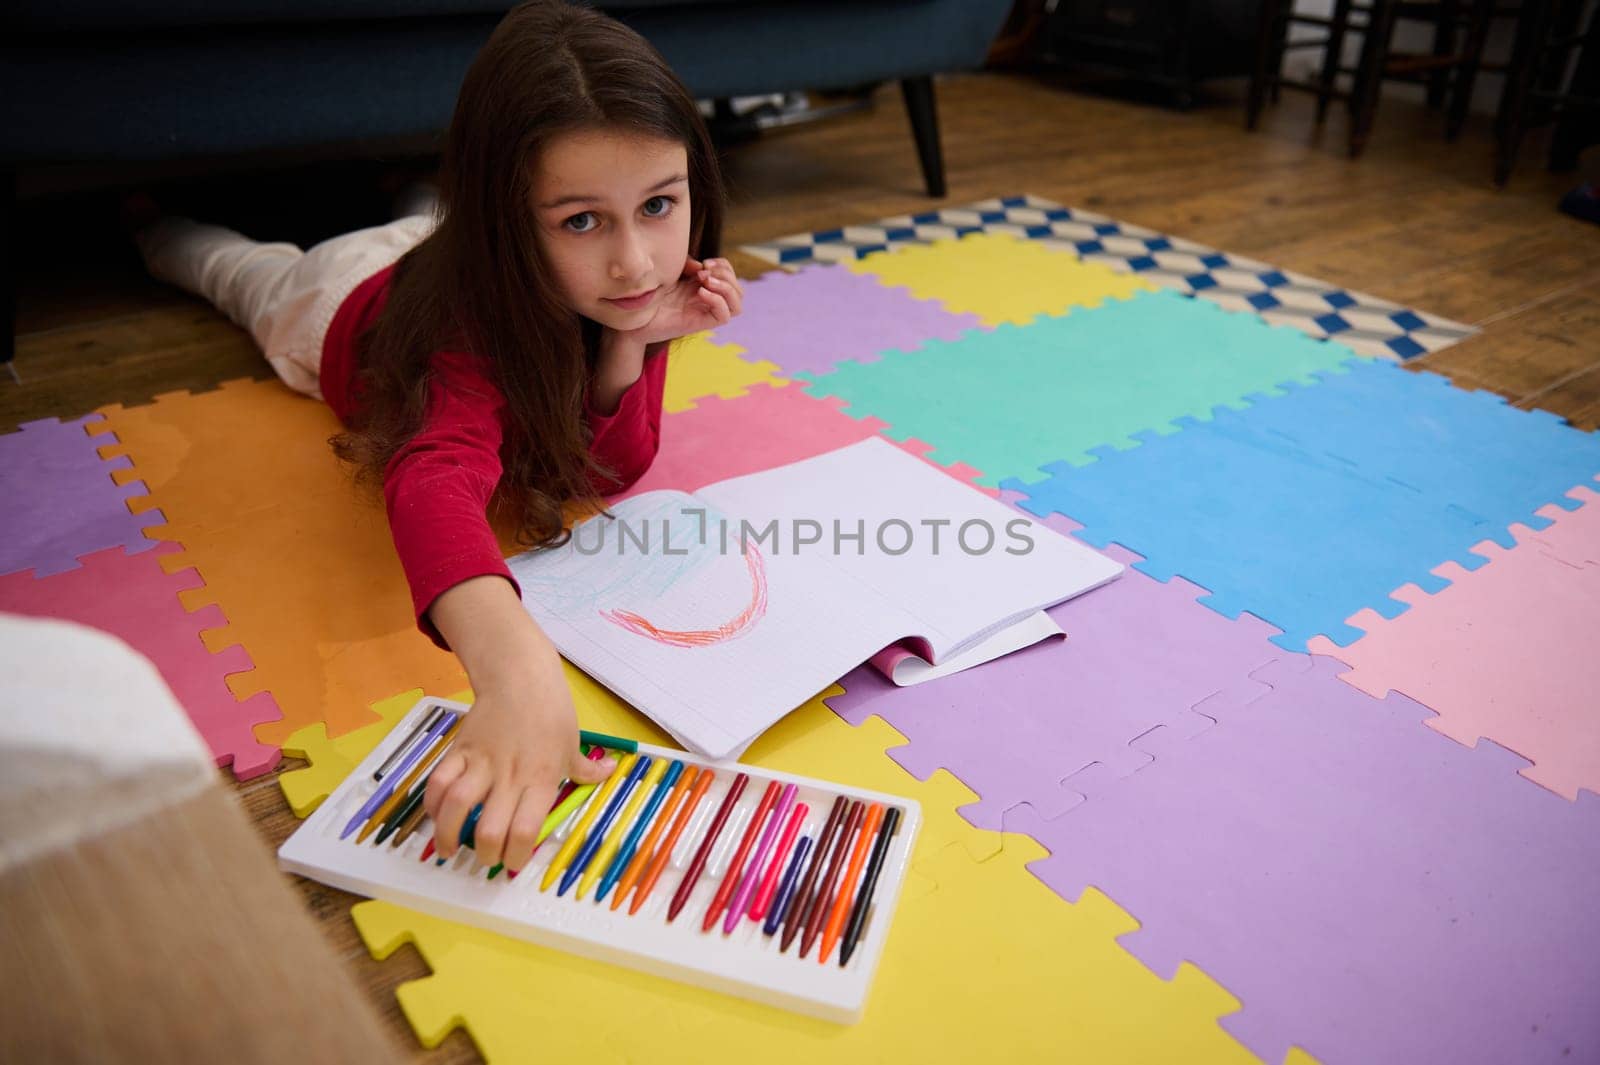 Little girl smiling looking at camera while taking a colorful pencil out of a box with pastel crayons, lying on her belly on a multicolored puzzle carpet. People. Education. Back to school concept by artgf